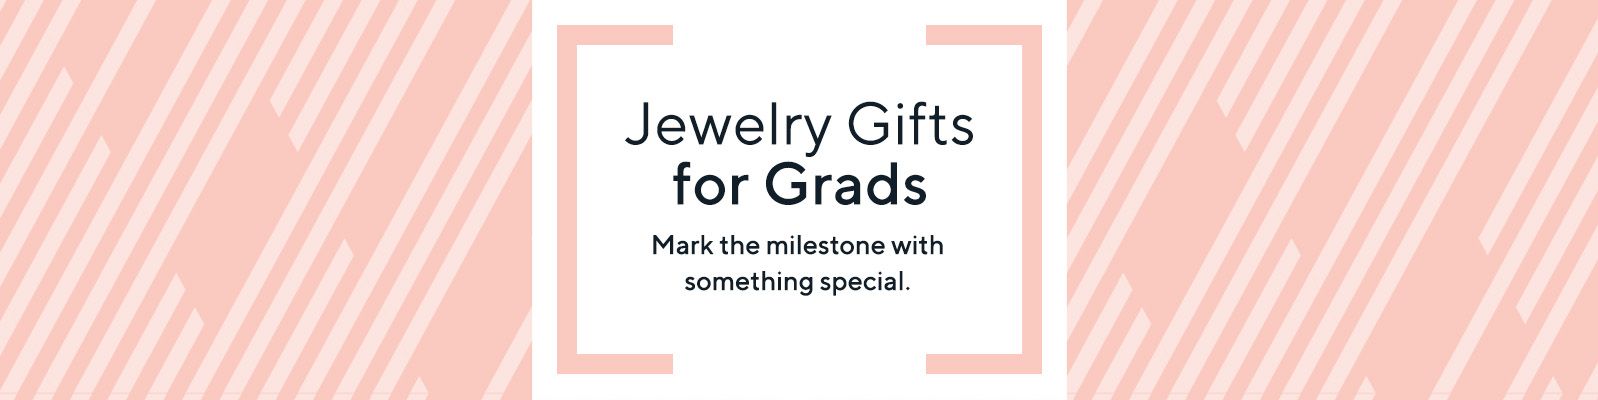 Jewelry Gifts for Grads.  Mark the milestone with something special.